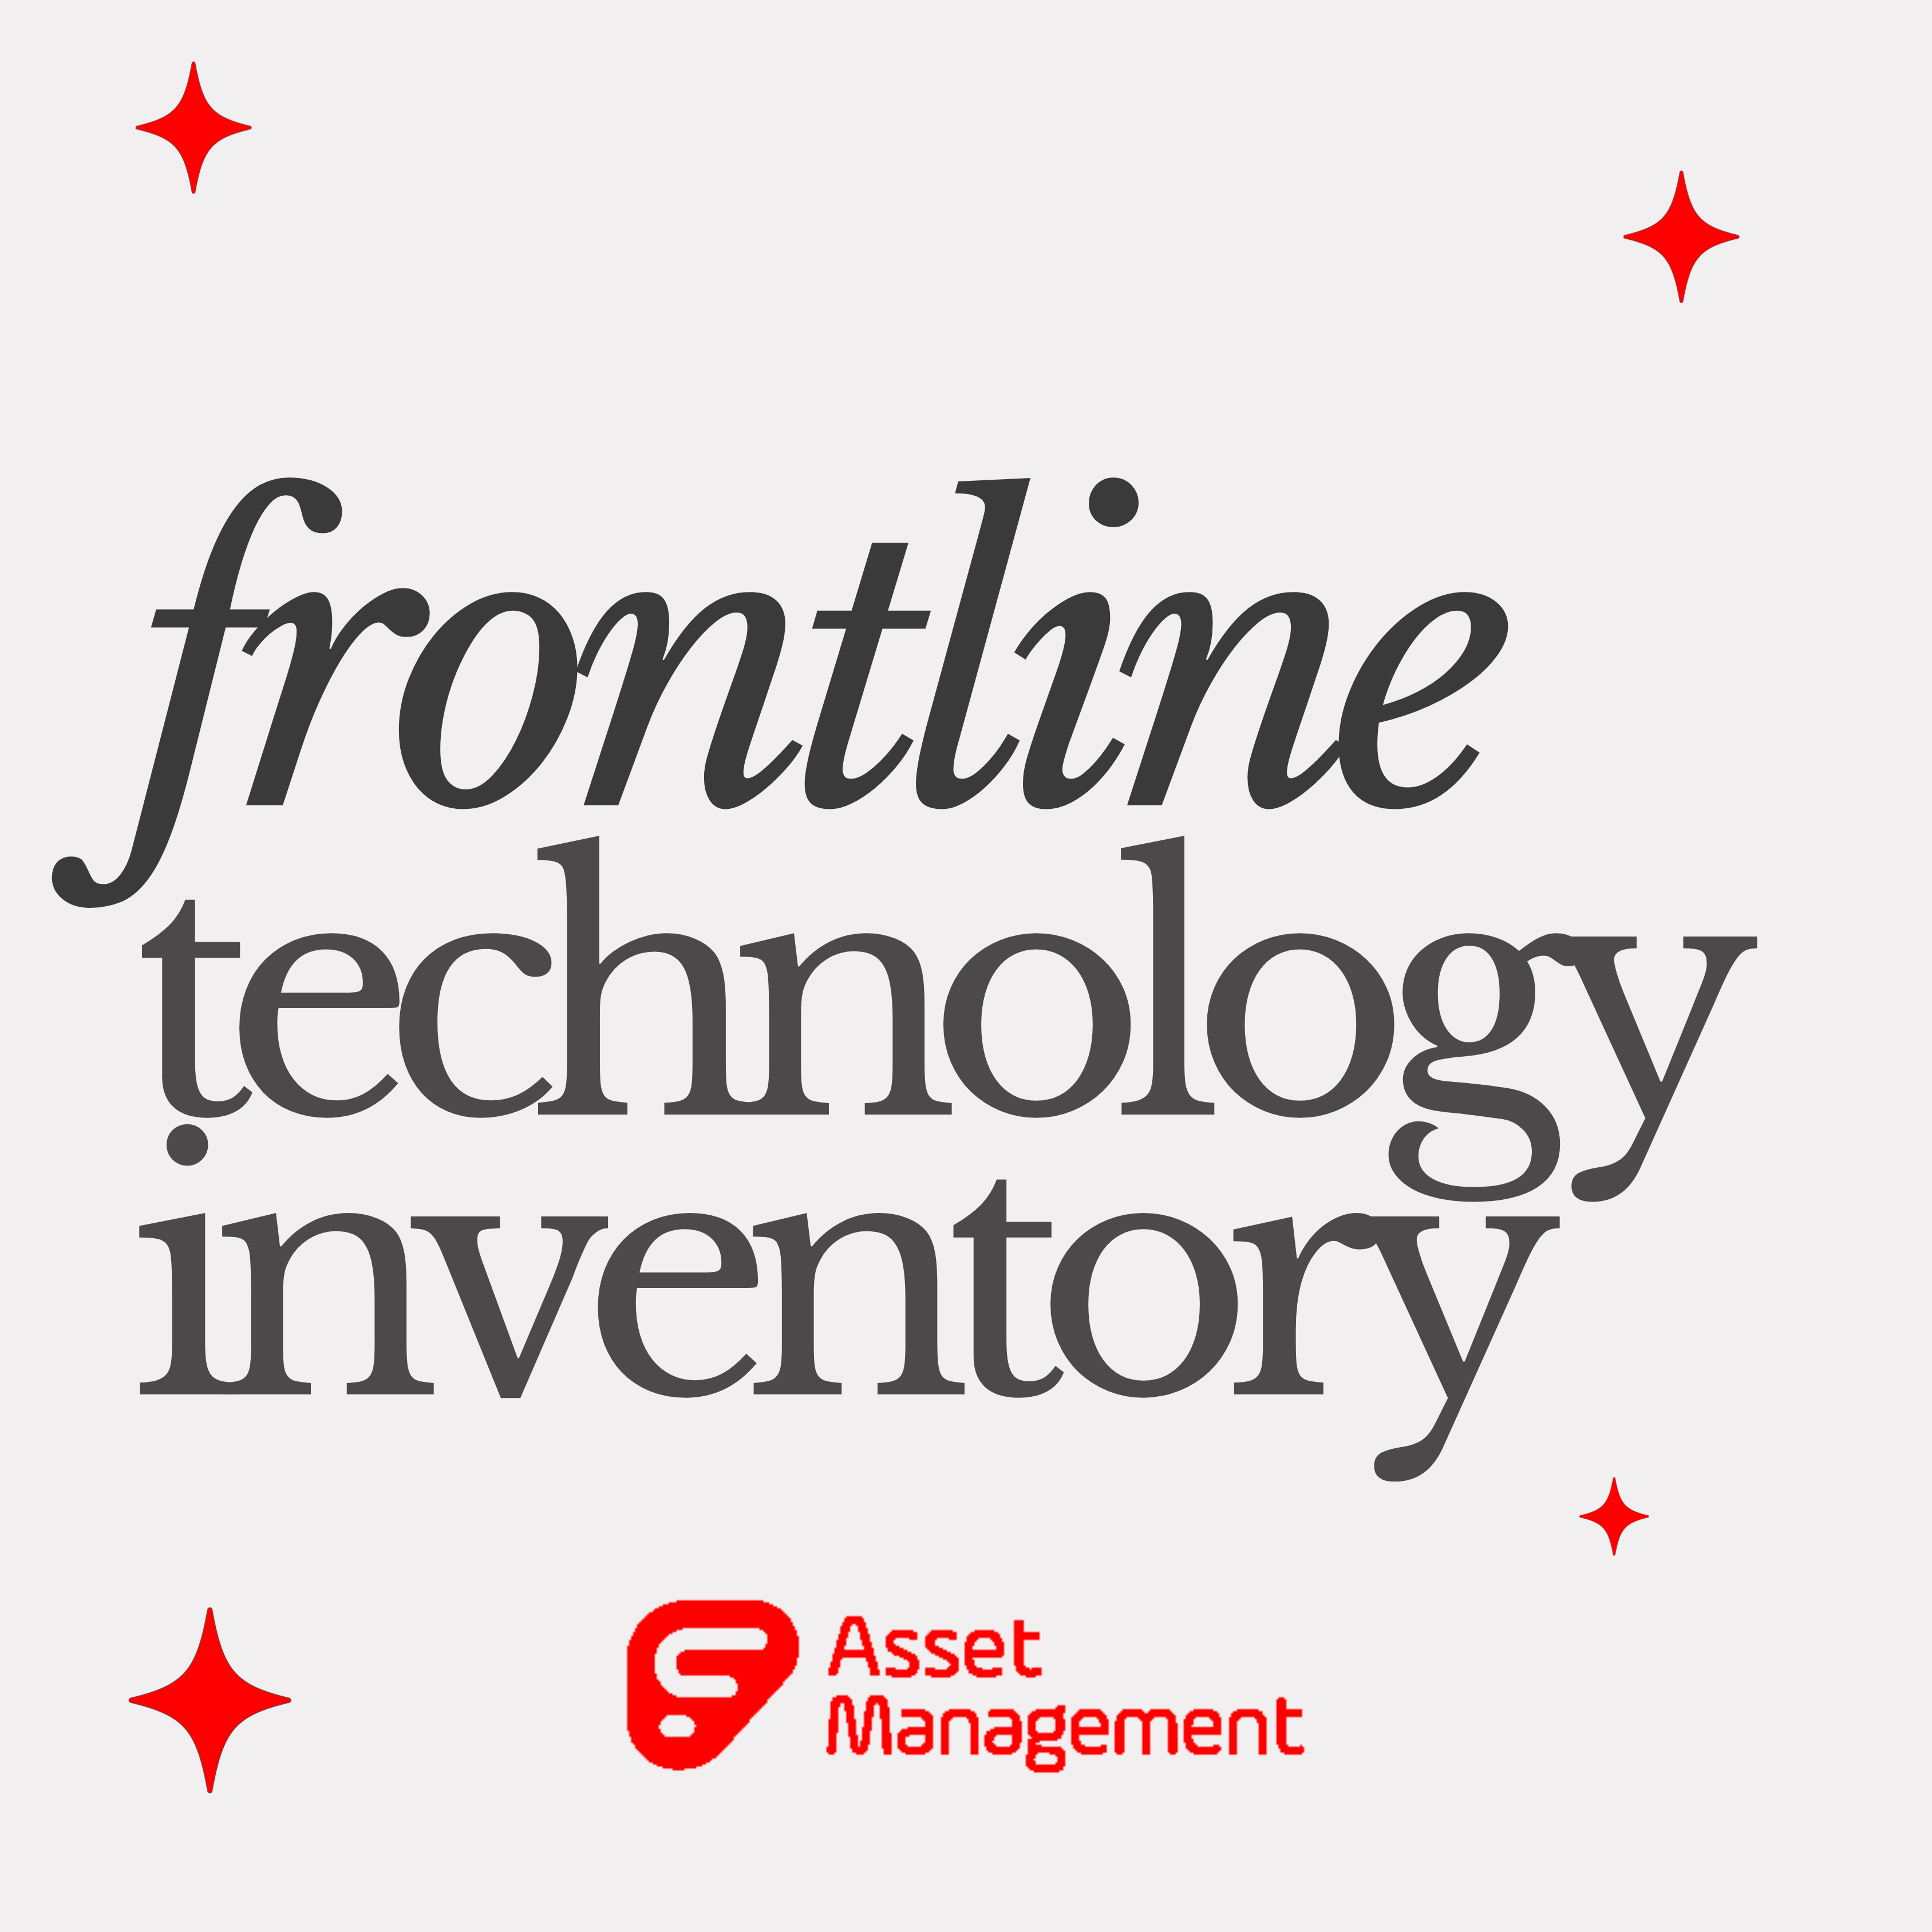 Frontline Technology Inventory